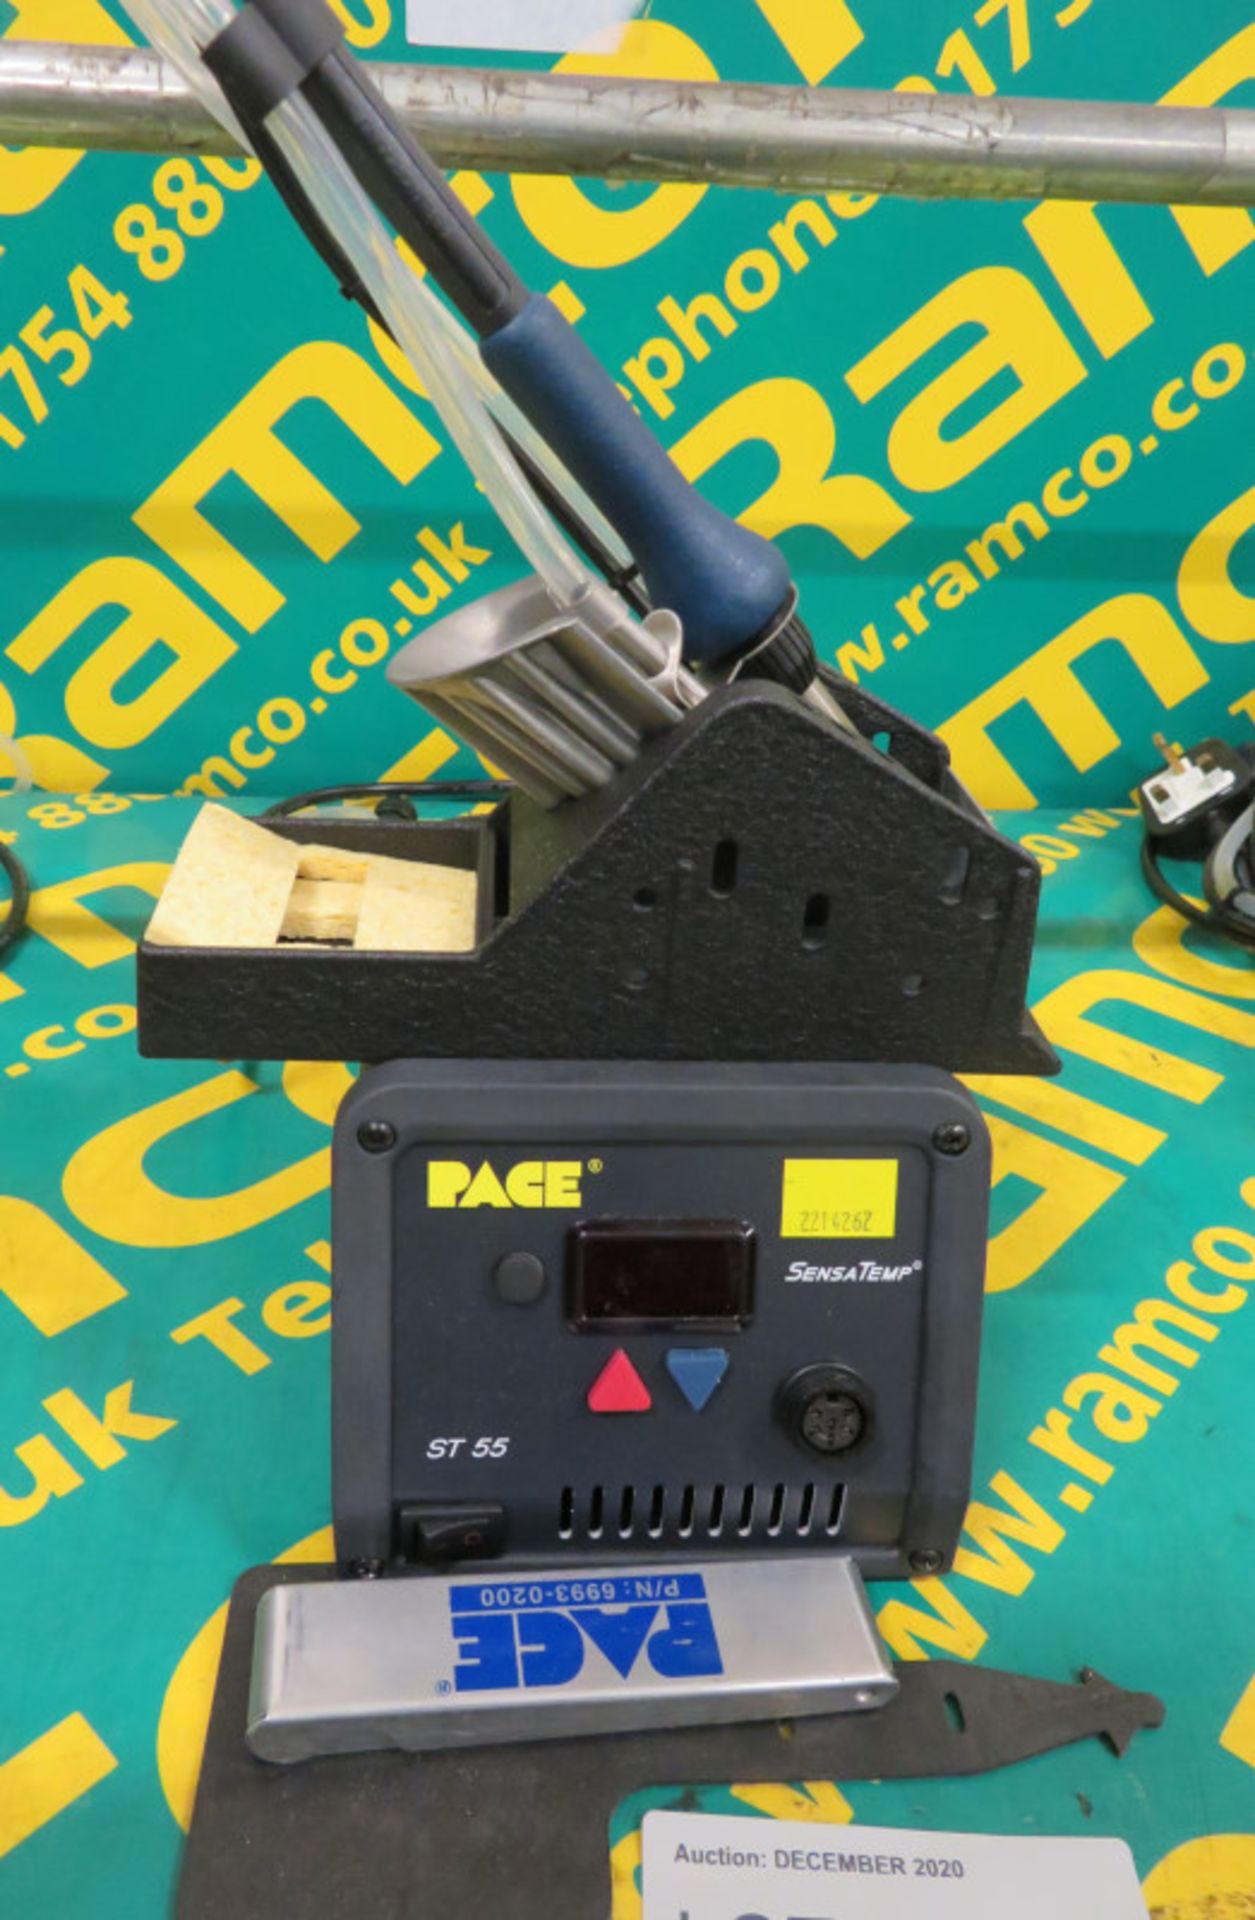 Pace Sensatemp ST 55 Soldering Station with Soldering Iron